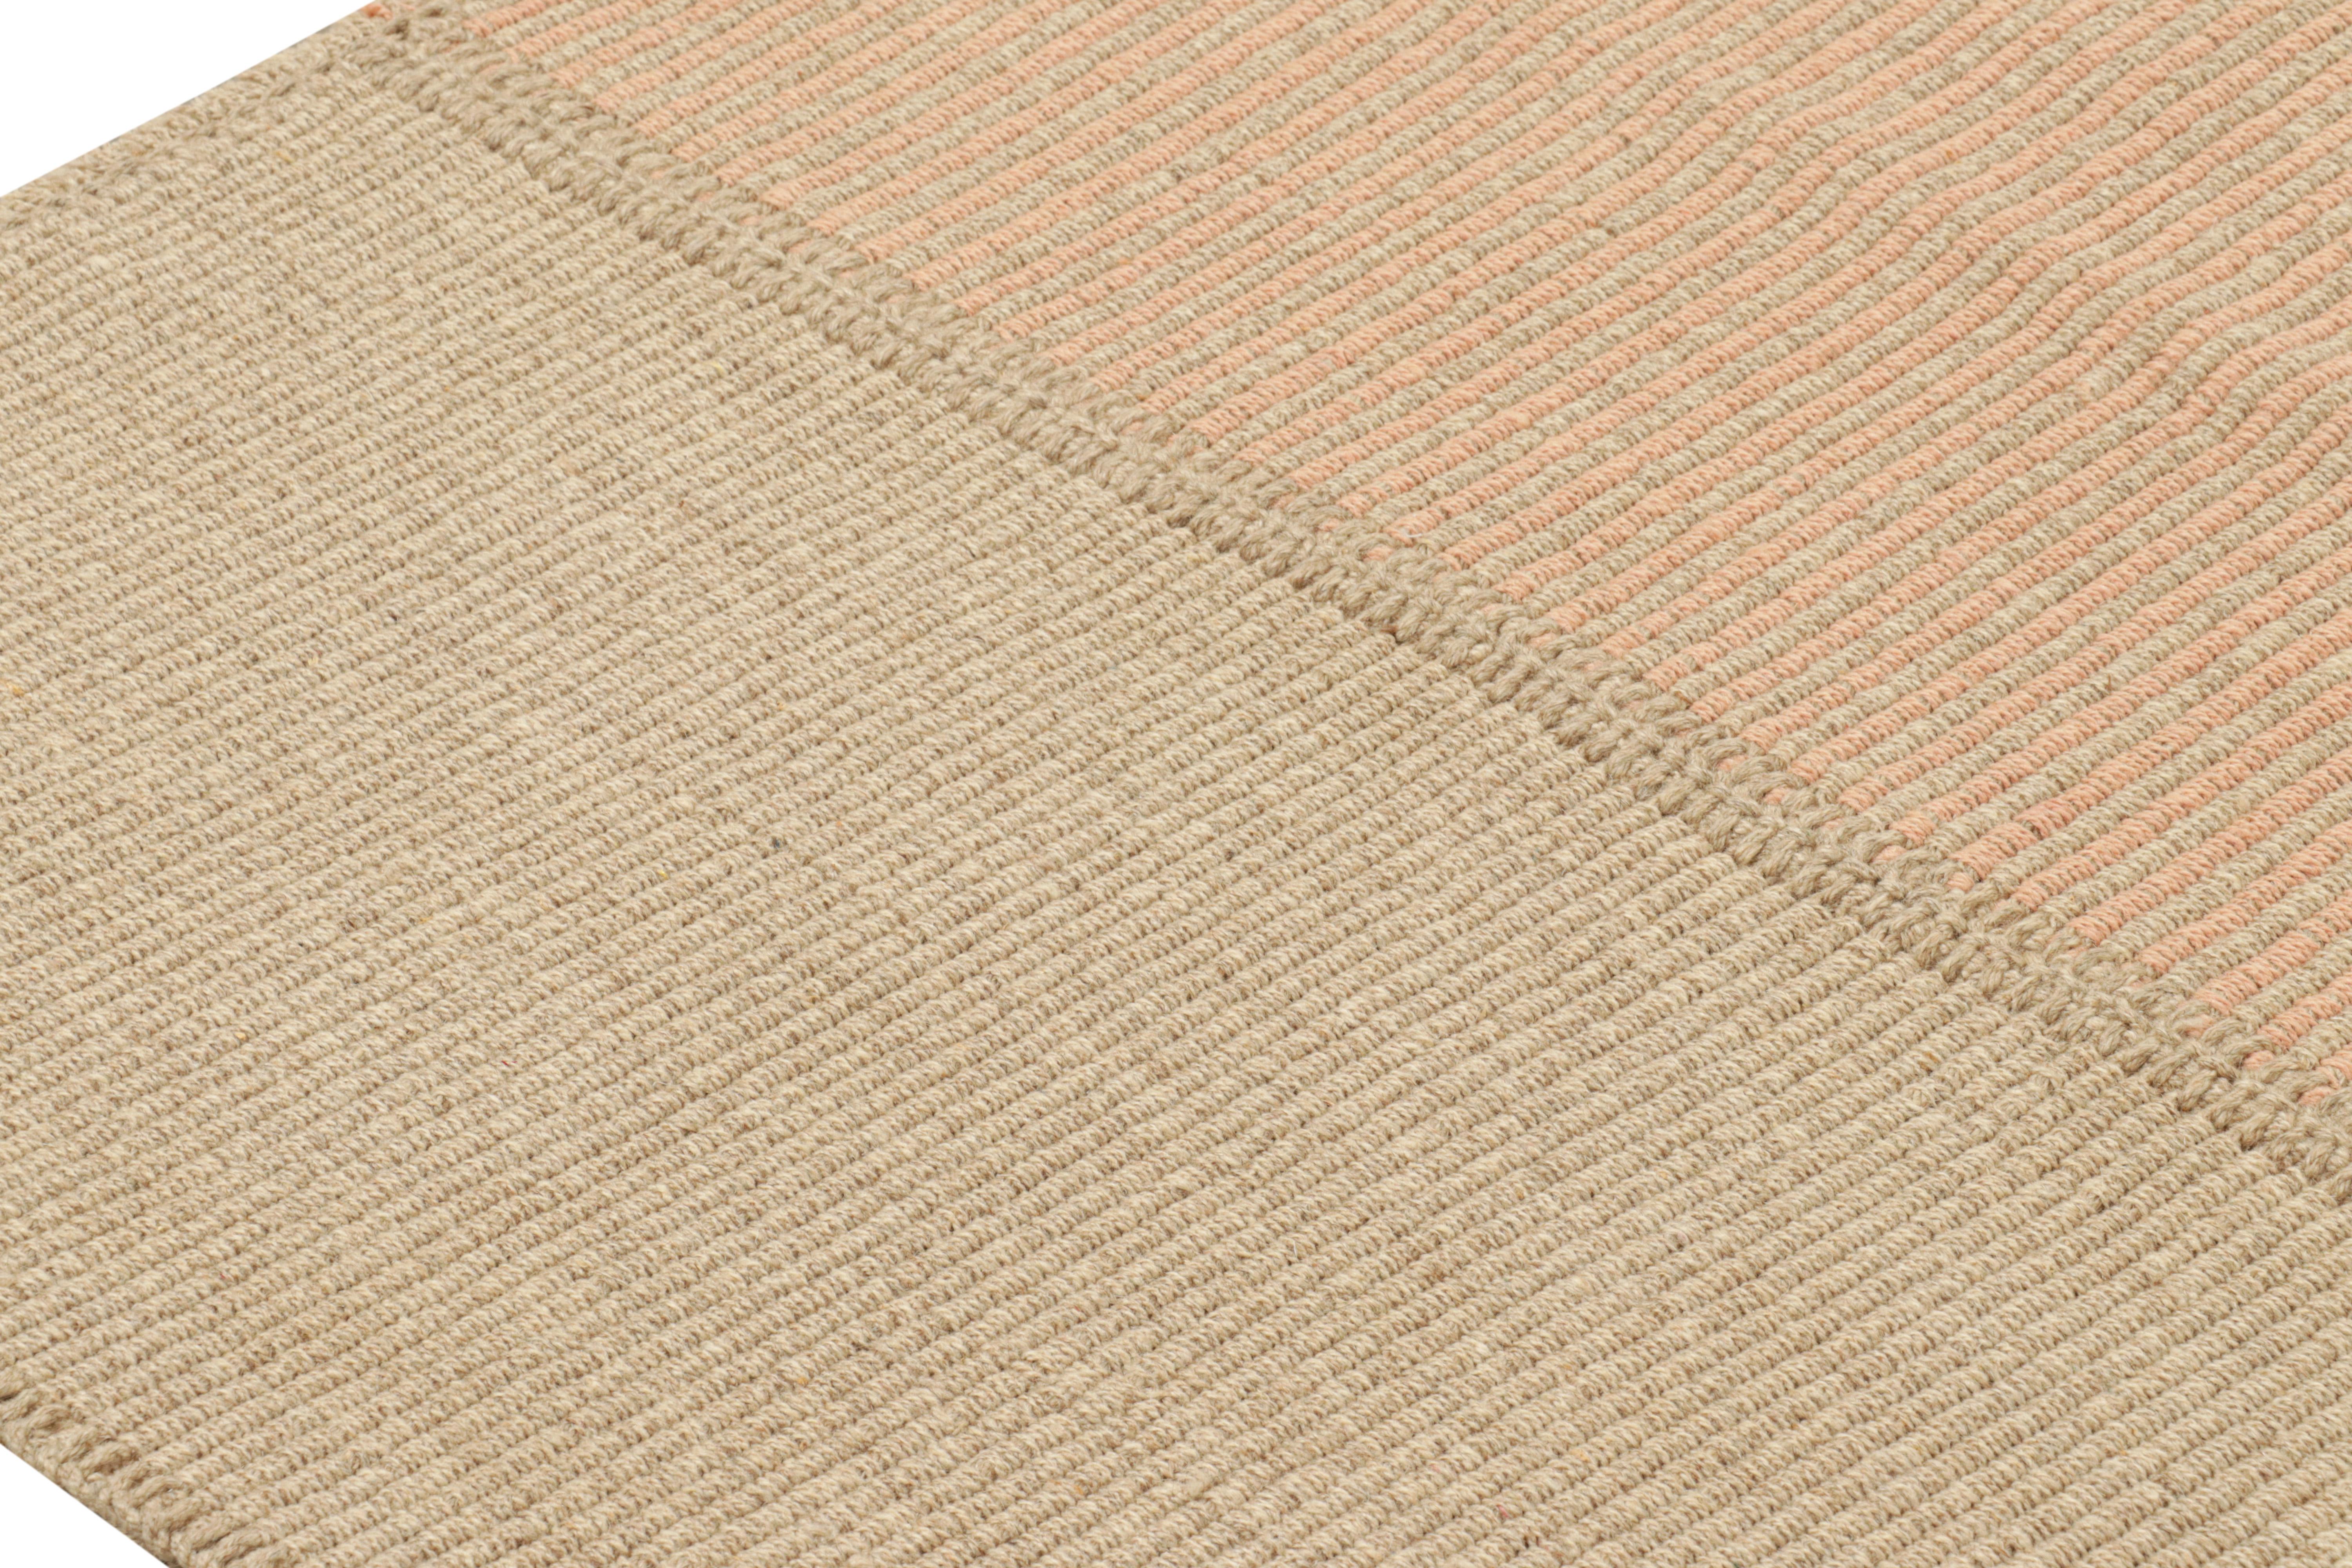 Modern Rug & Kilim’s Contemporary Kilim in Peach and Beige Textural Stripes  For Sale